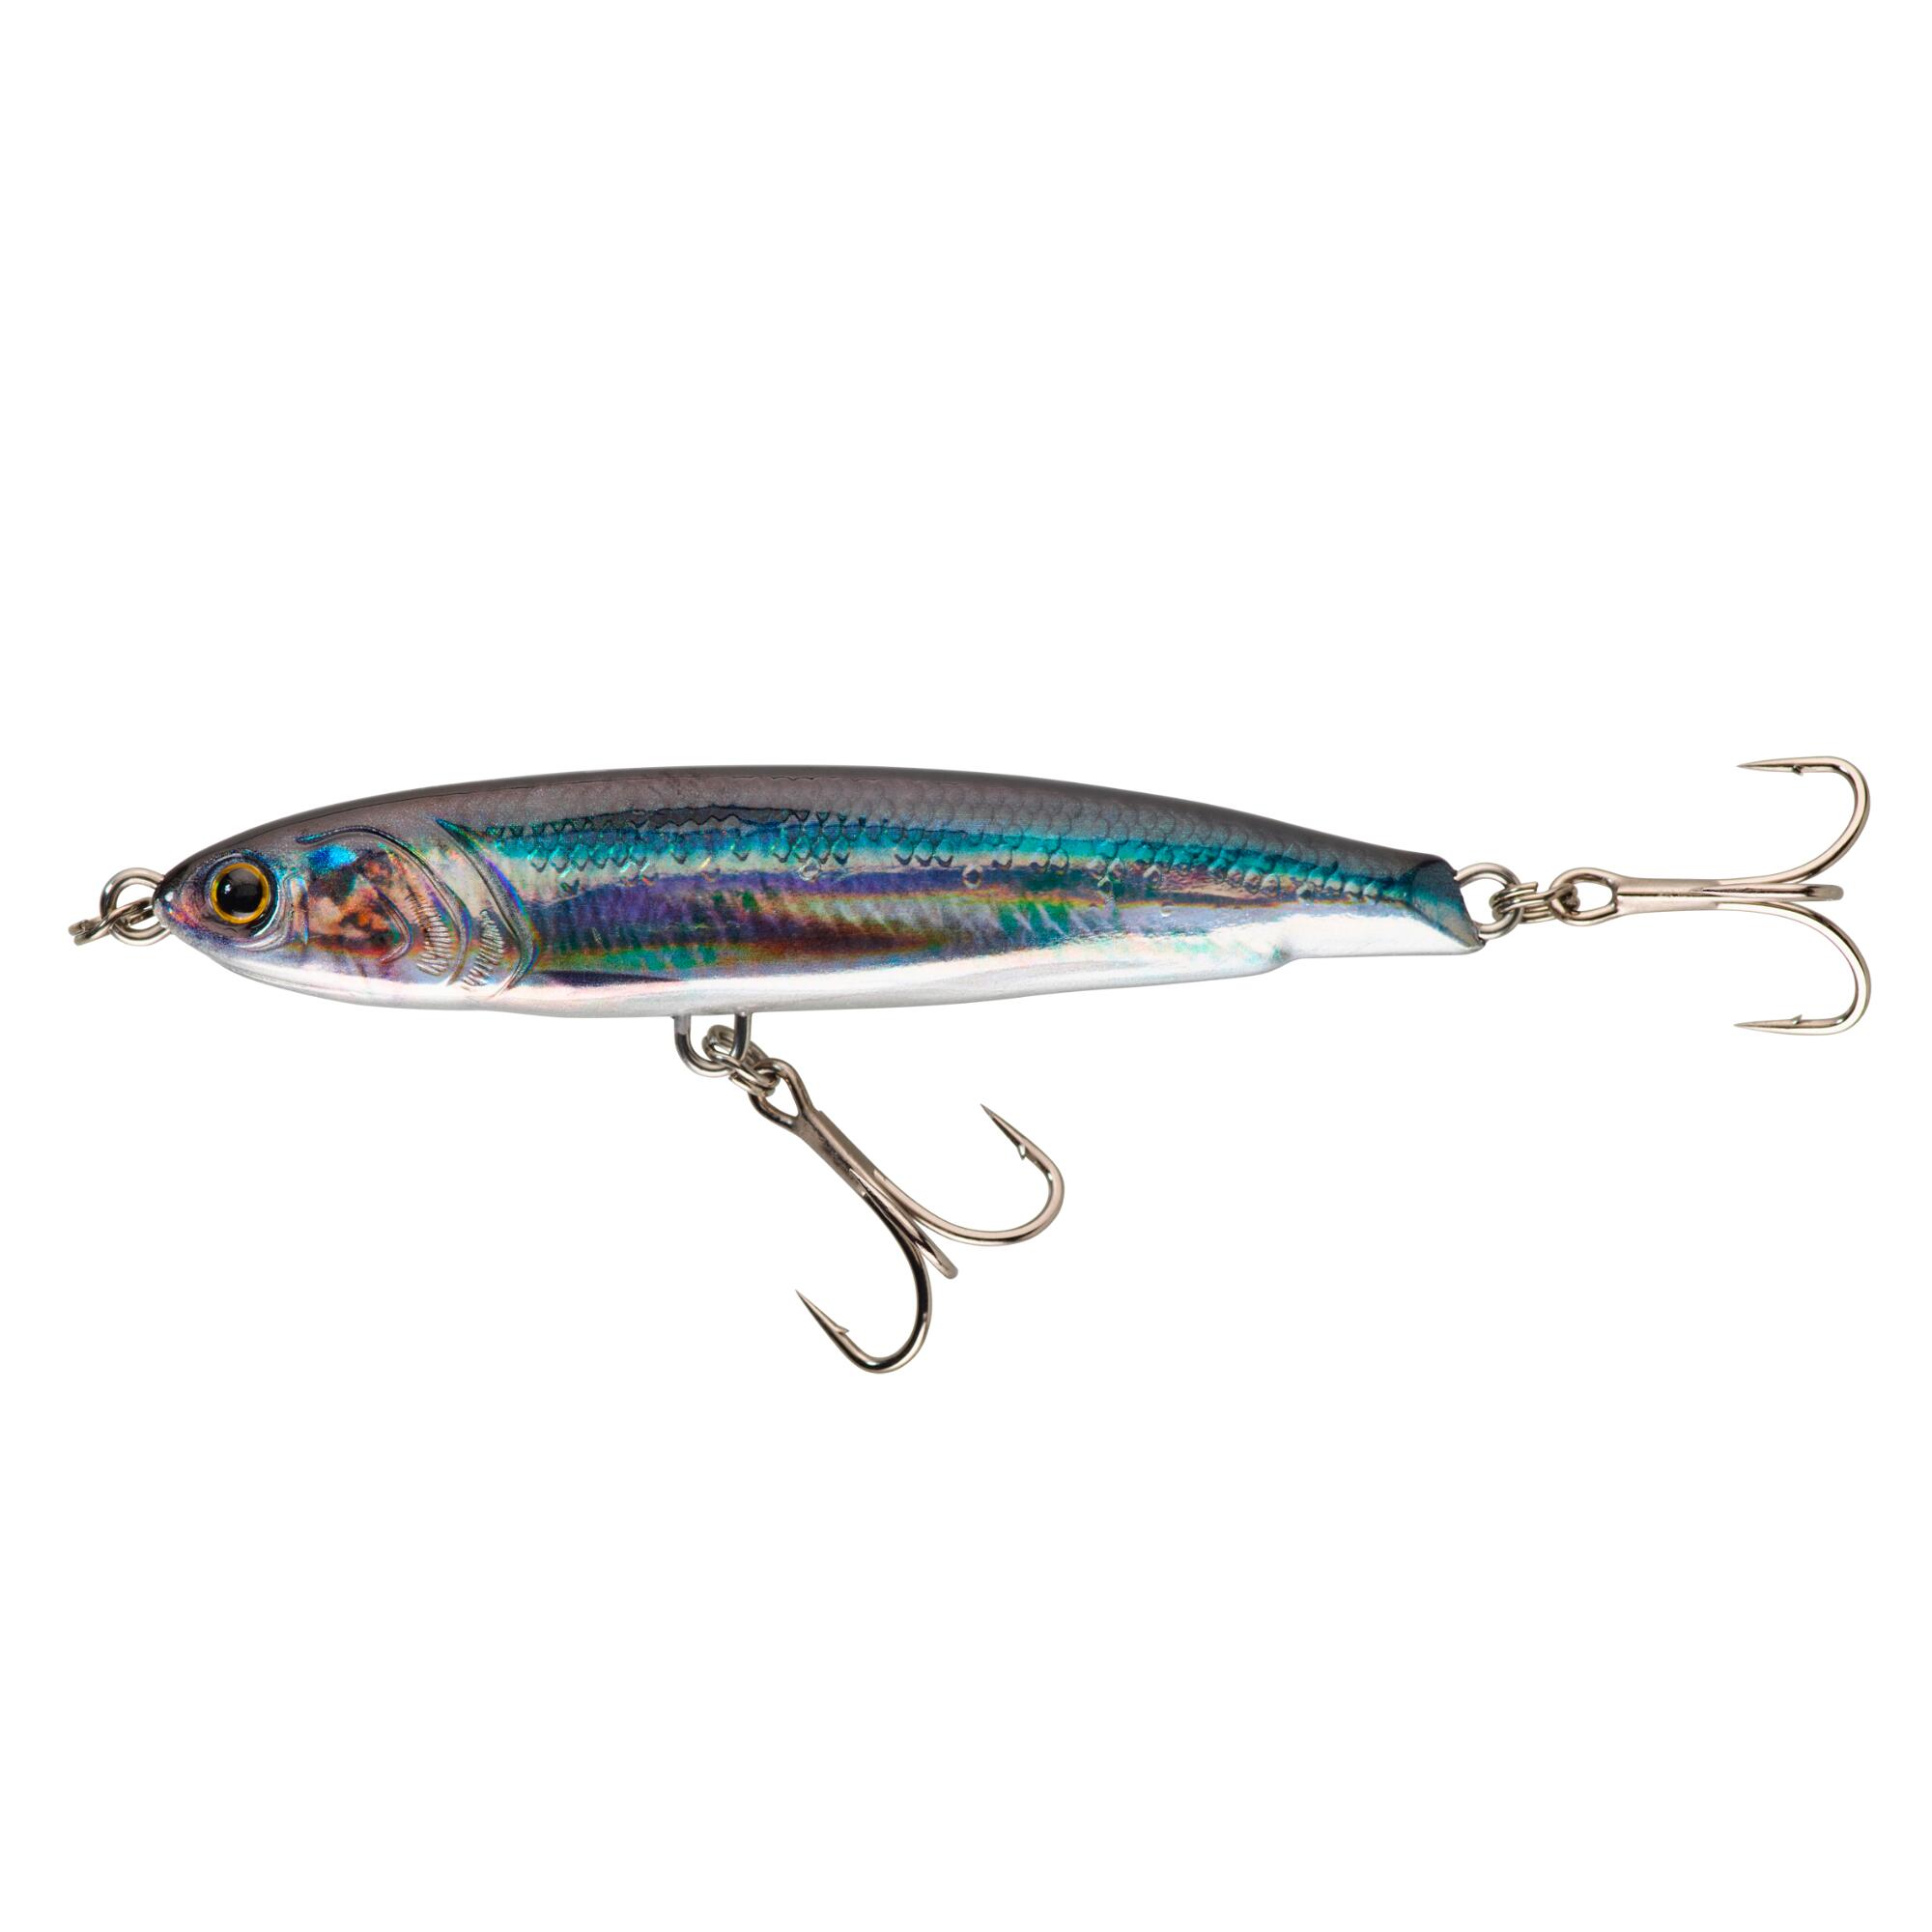 Sea lure fishing ANCHO LM 95 US ANCHOVY hard lure 1/10